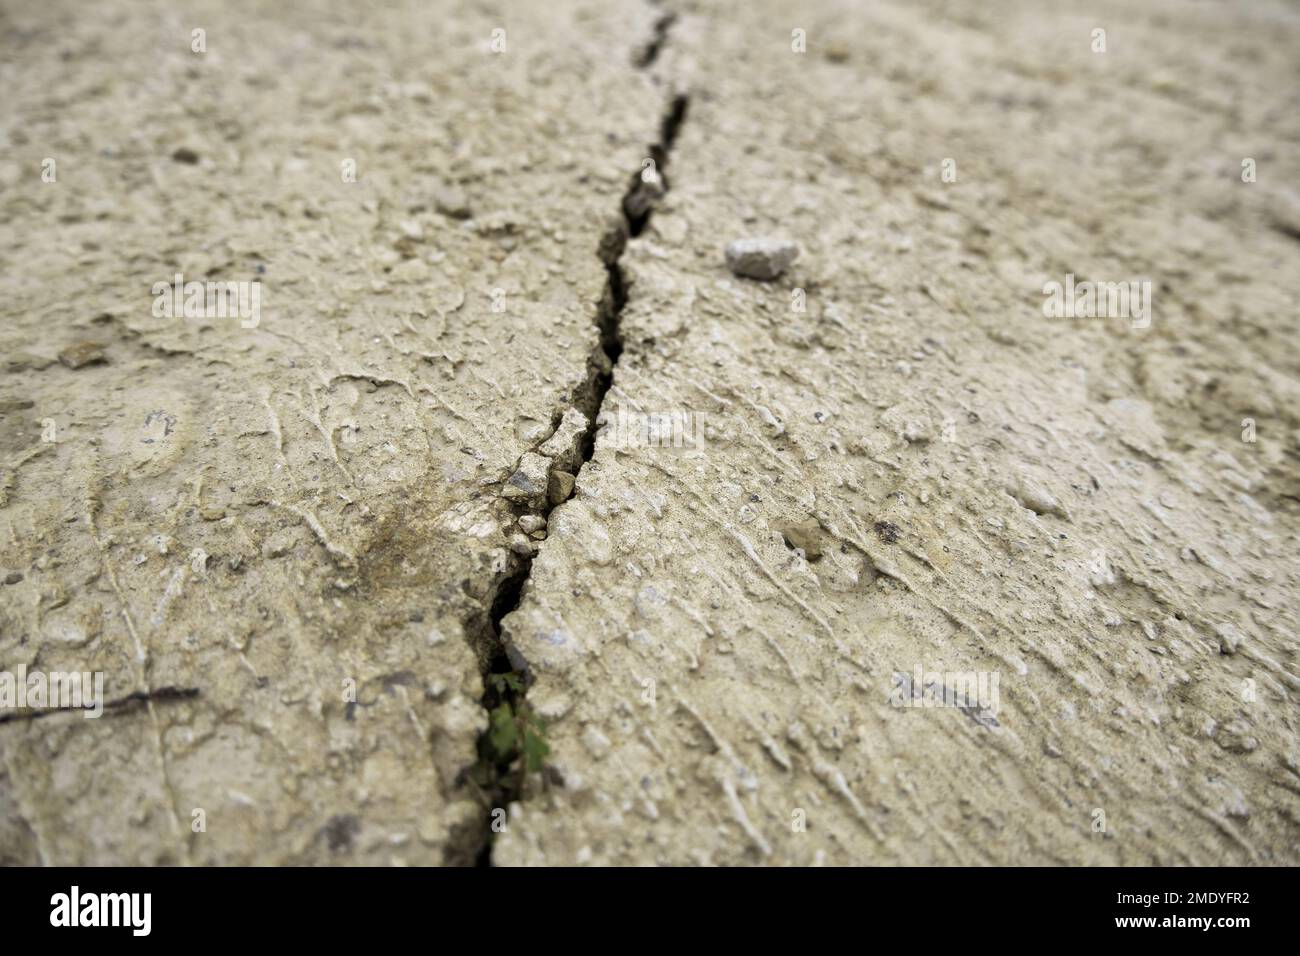 Detail of drought and climate change, heat and lack of rain Stock Photo